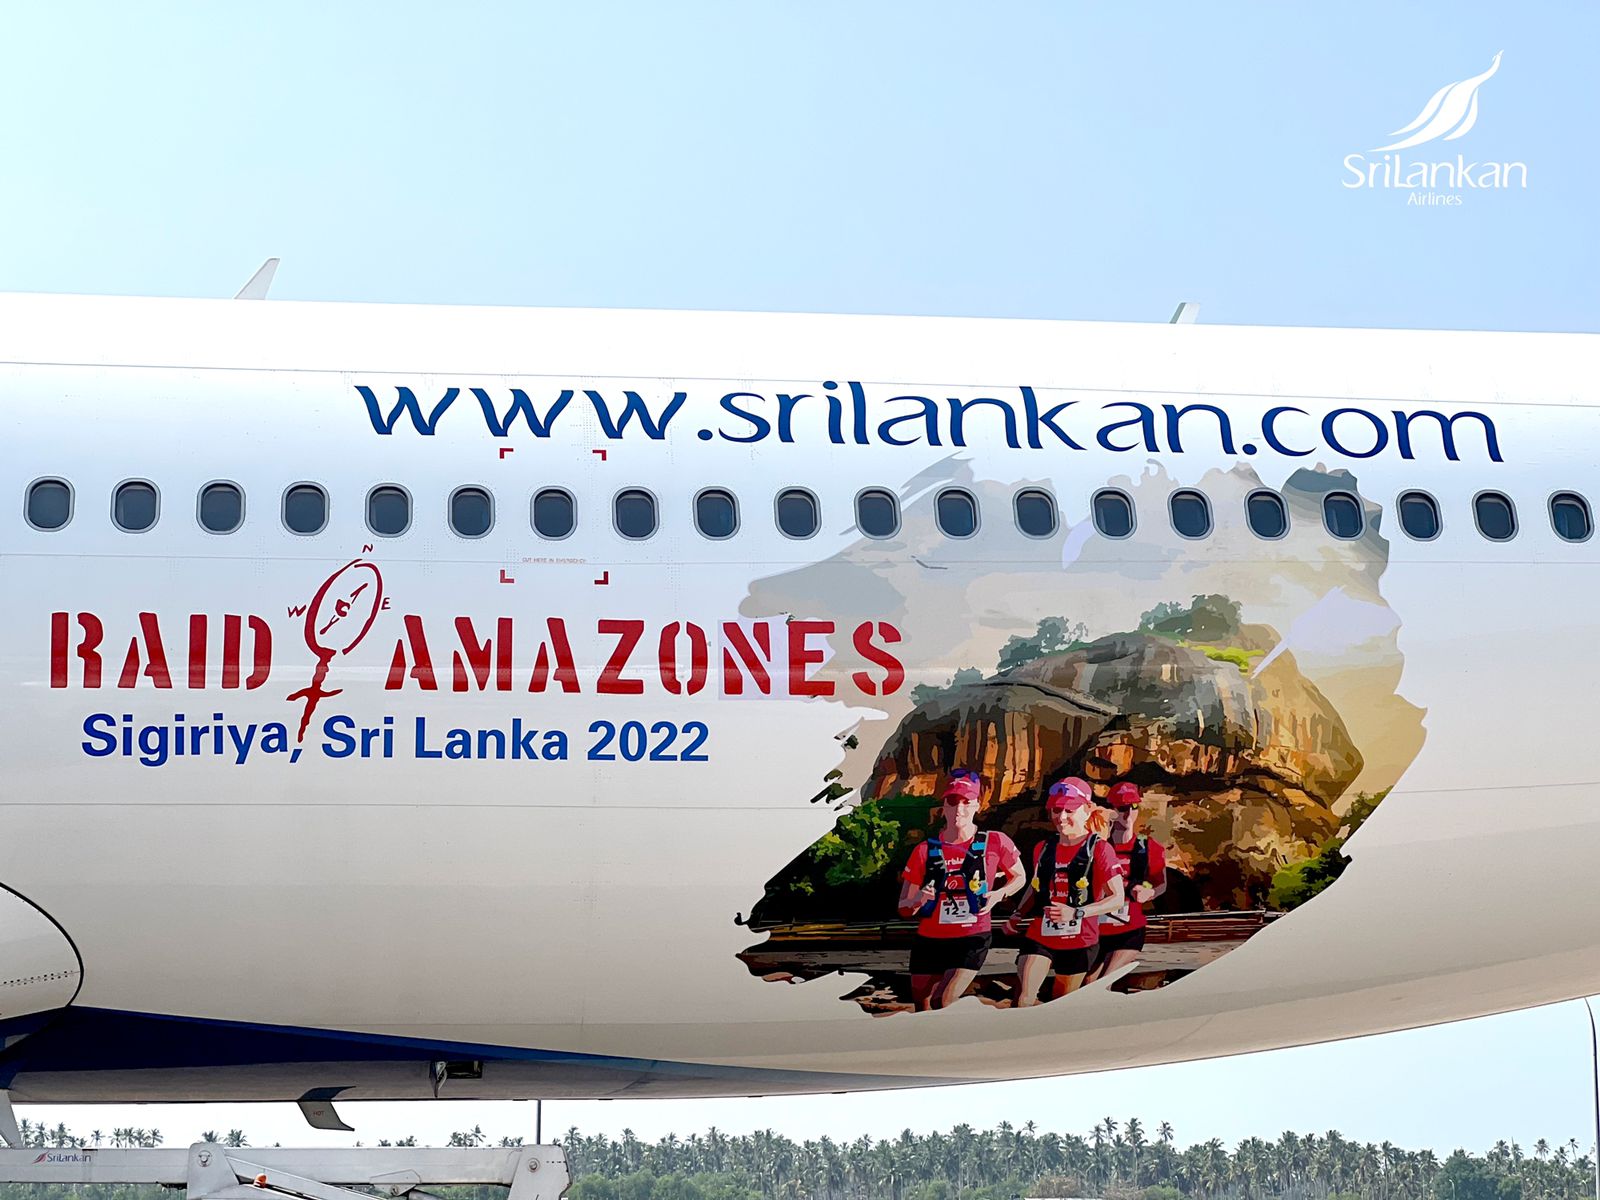 SriLankan Airlines aircraft with the customized livery celebrating ‘Raid Amazones 2022’ II